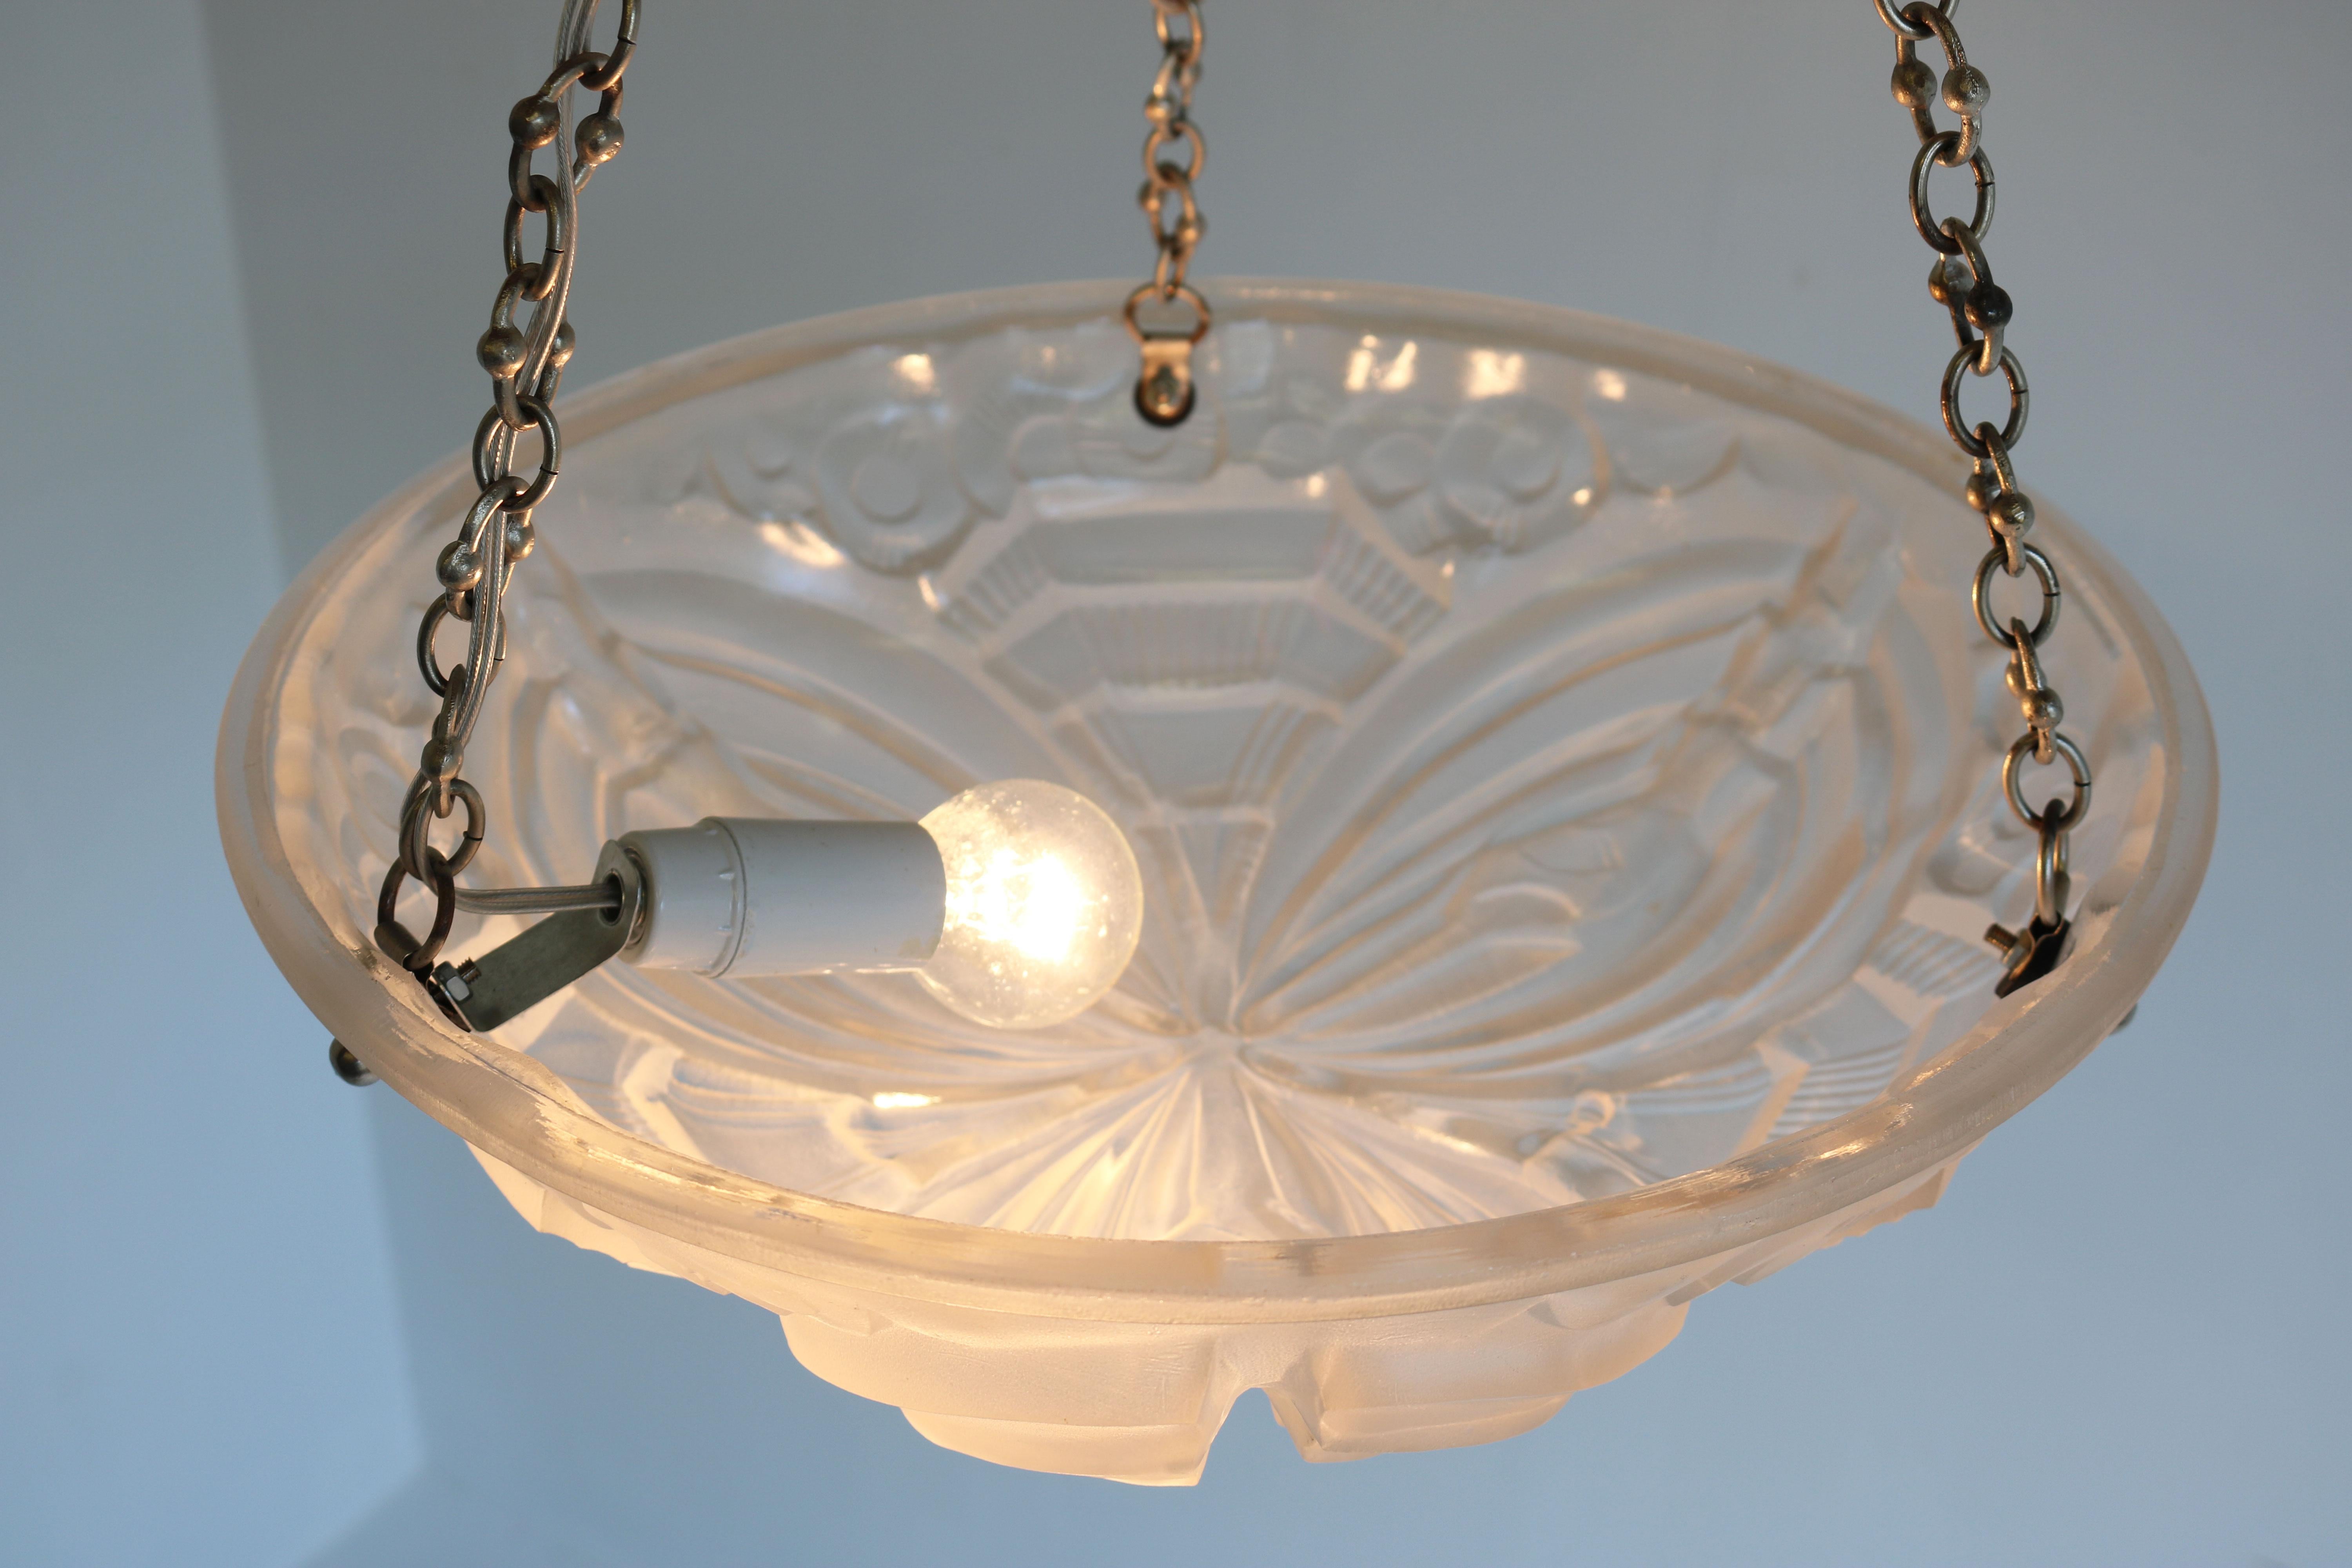 Exquisite White Geometric French Antique Art Deco Chandelier 1930 Henry Mouynet For Sale 5